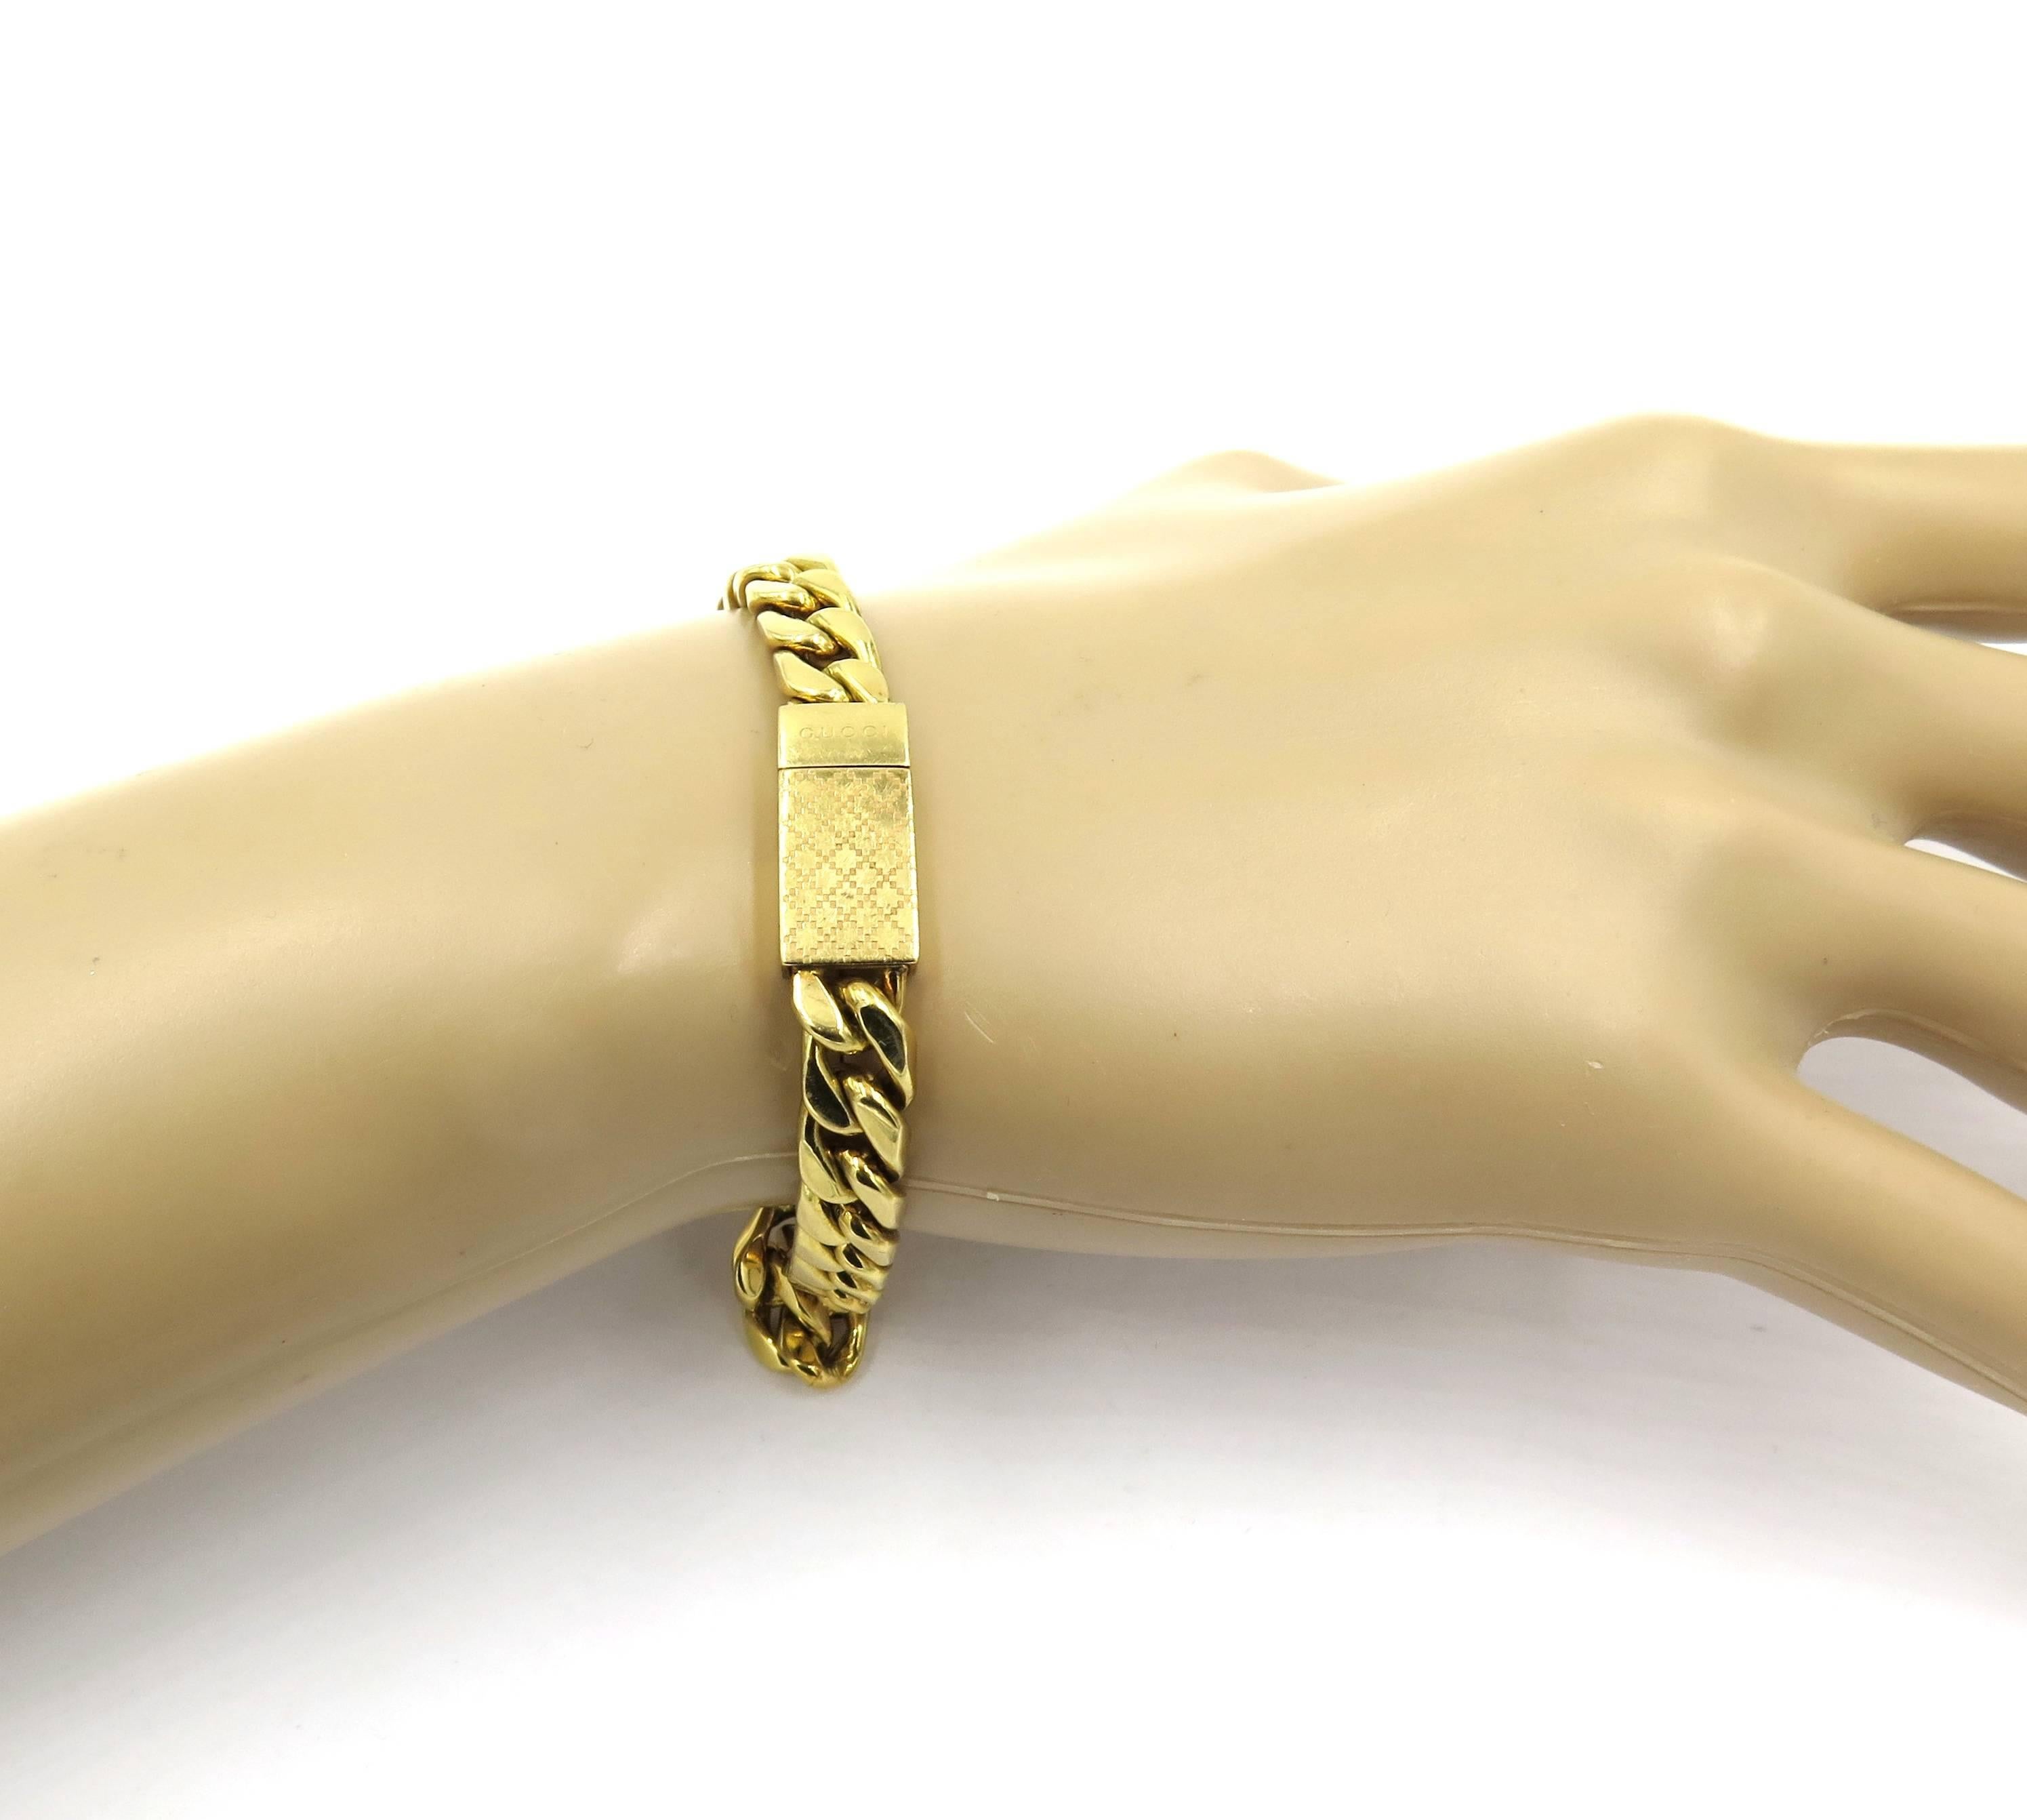 An 18 karat yellow gold bracelet, Gucci. From the Diamantissima collection. Designed as a polished flat curb link chain, with rectangular clasp, enhanced by engraved navette shaped patterns. Length is approximately 8 inches. Gross weight is